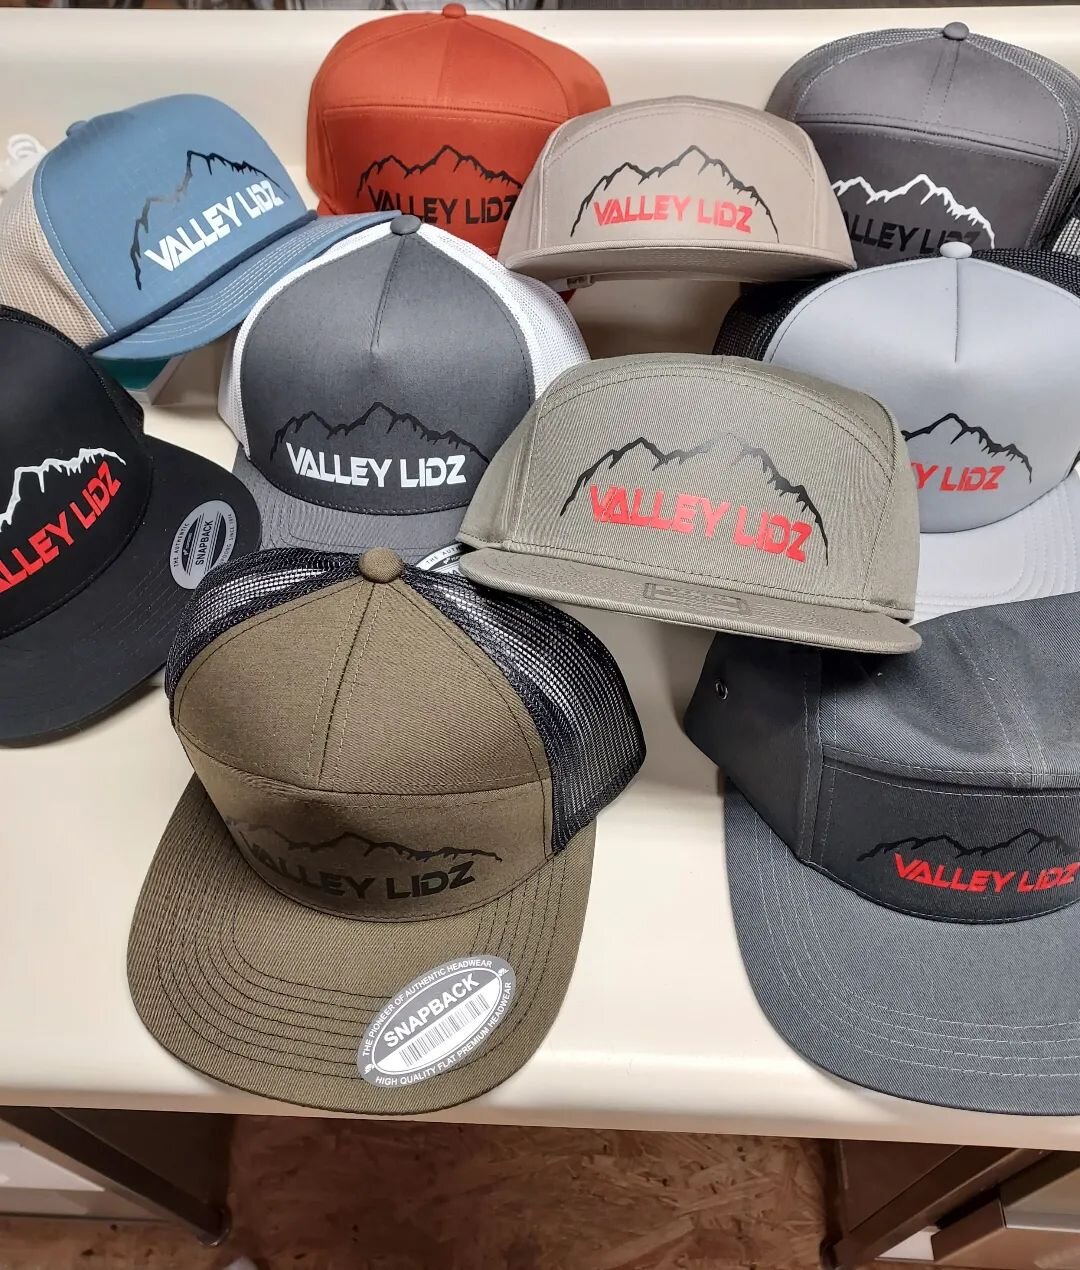 You asked, and we listened. @valleylidz  #valleylidz hat's are now available for purchase. 😃 What you see is what we have. (At the moment) DM us for price and to purchase. 

If you're in Fruita this weekend, be sure to stop by and see us.We will hav